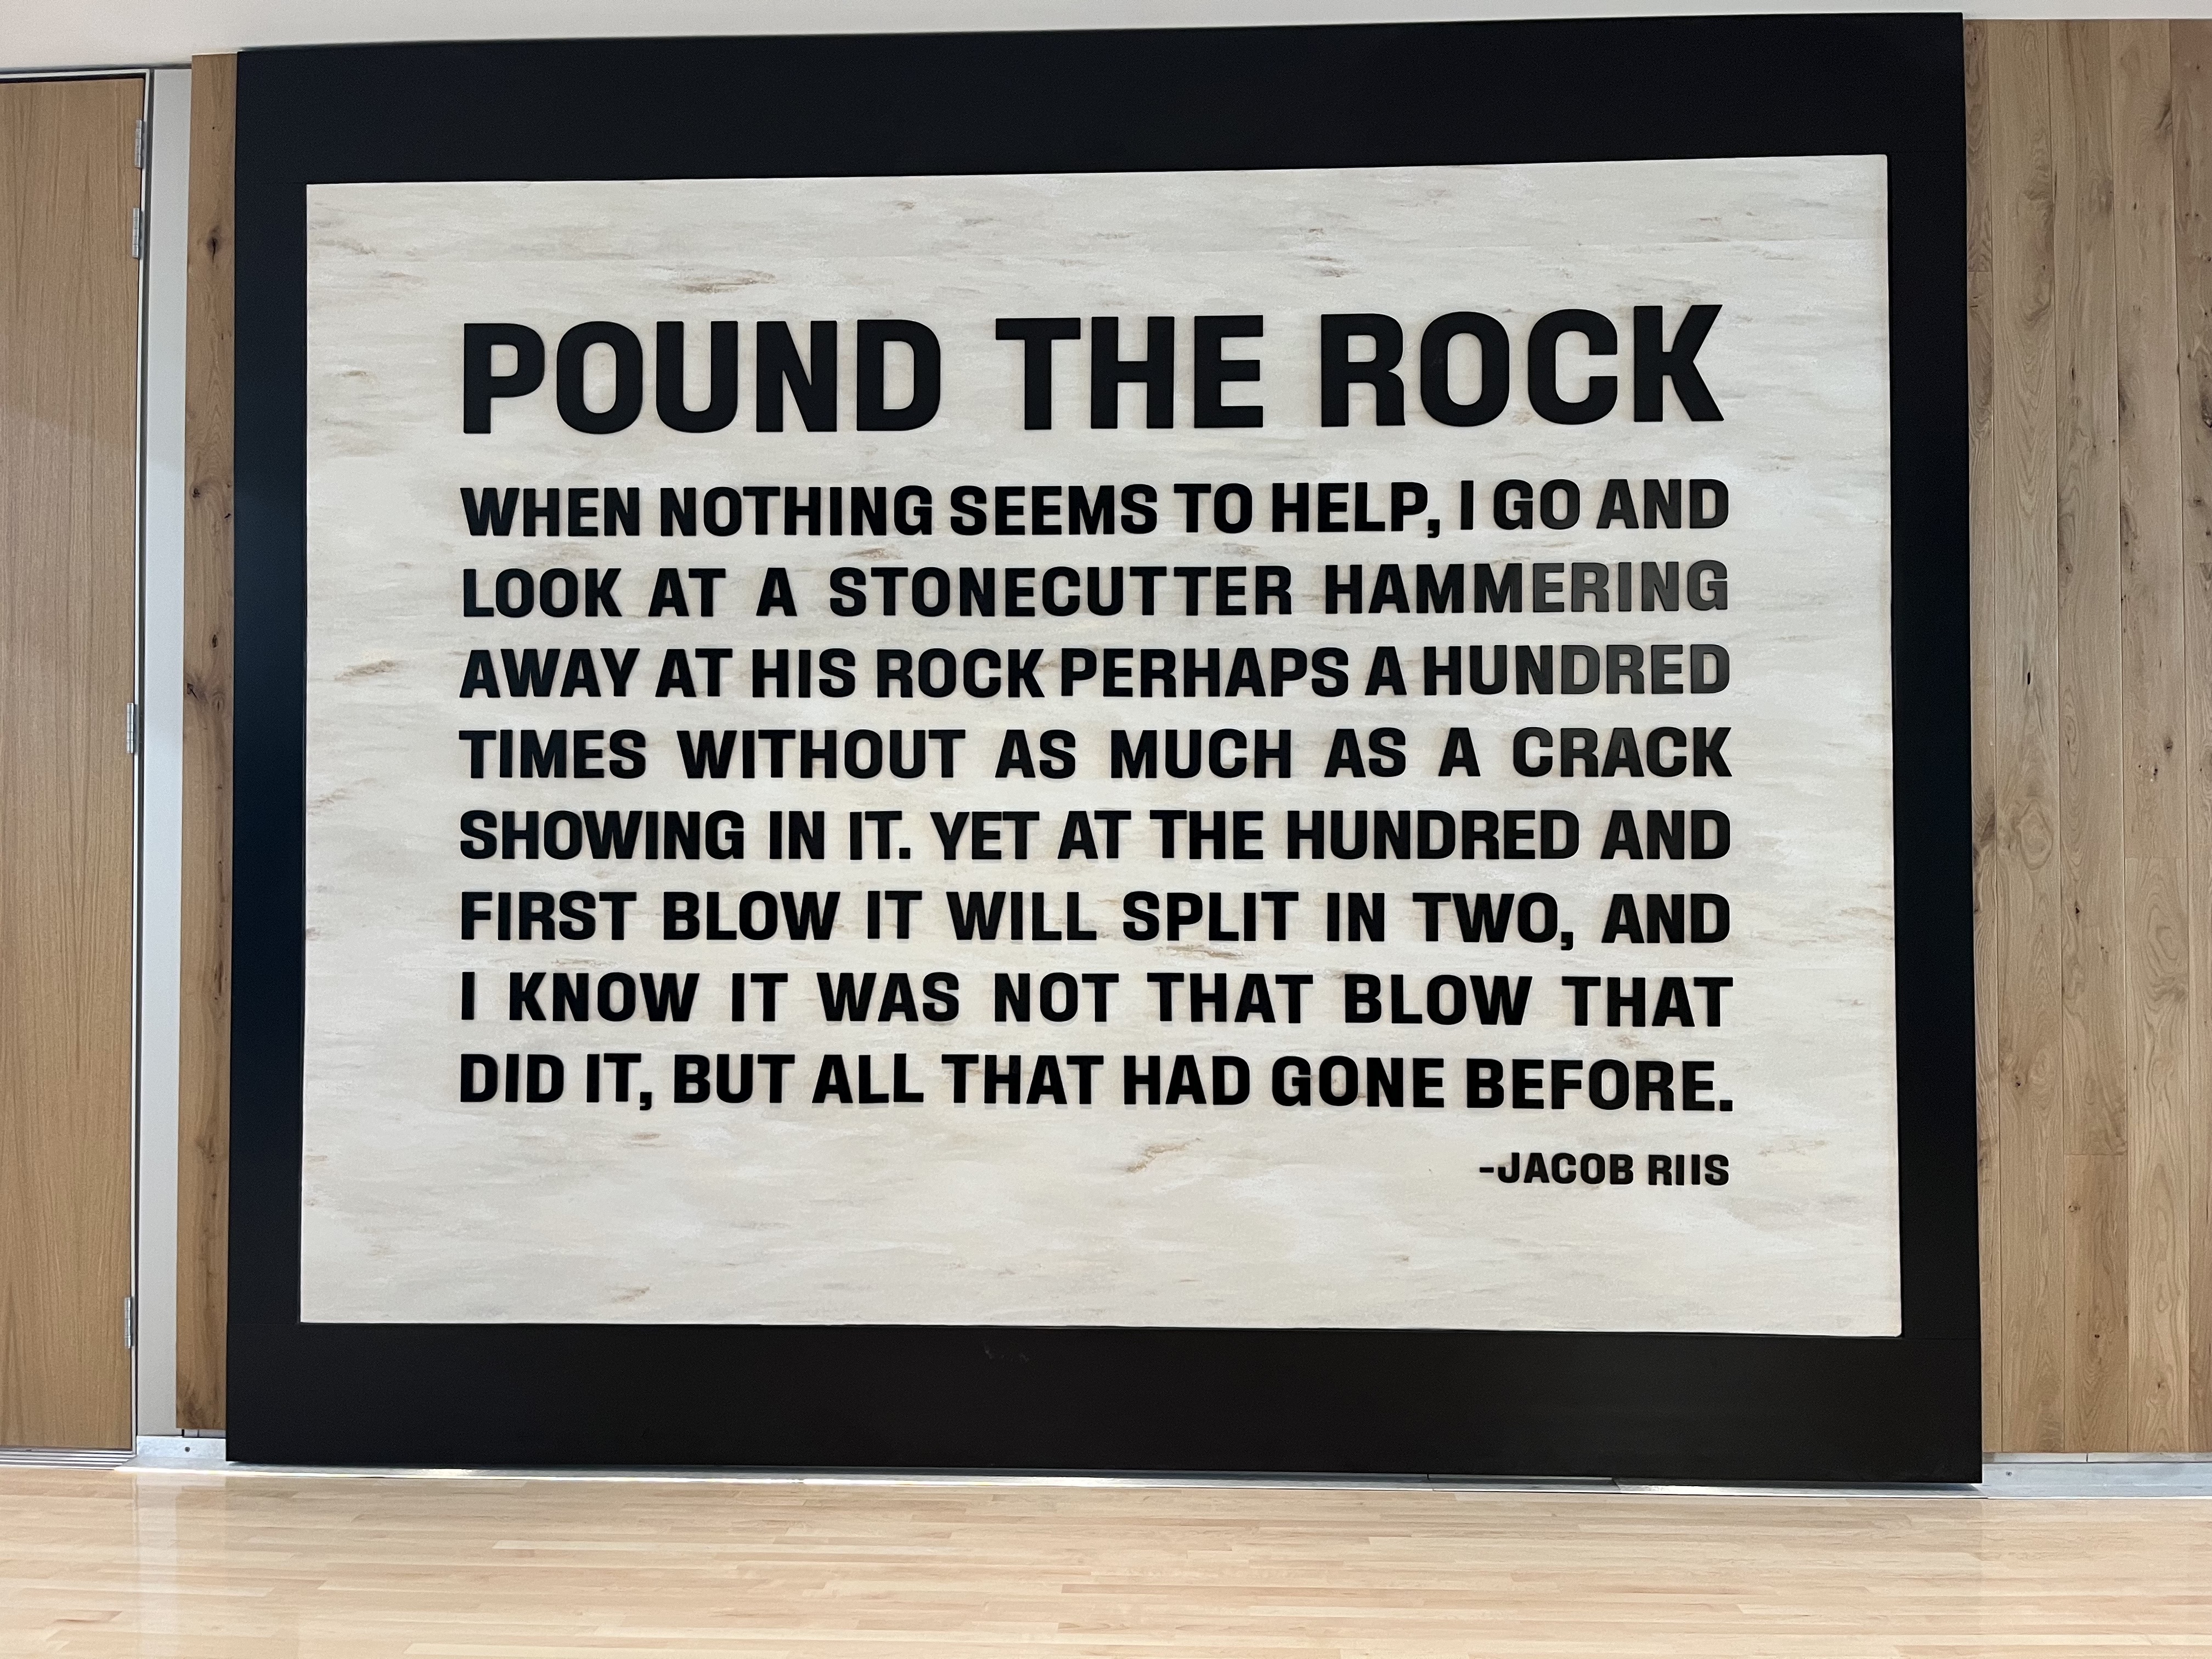 Spurs By the Numbers- History of #4 (Part 1) - Pounding The Rock